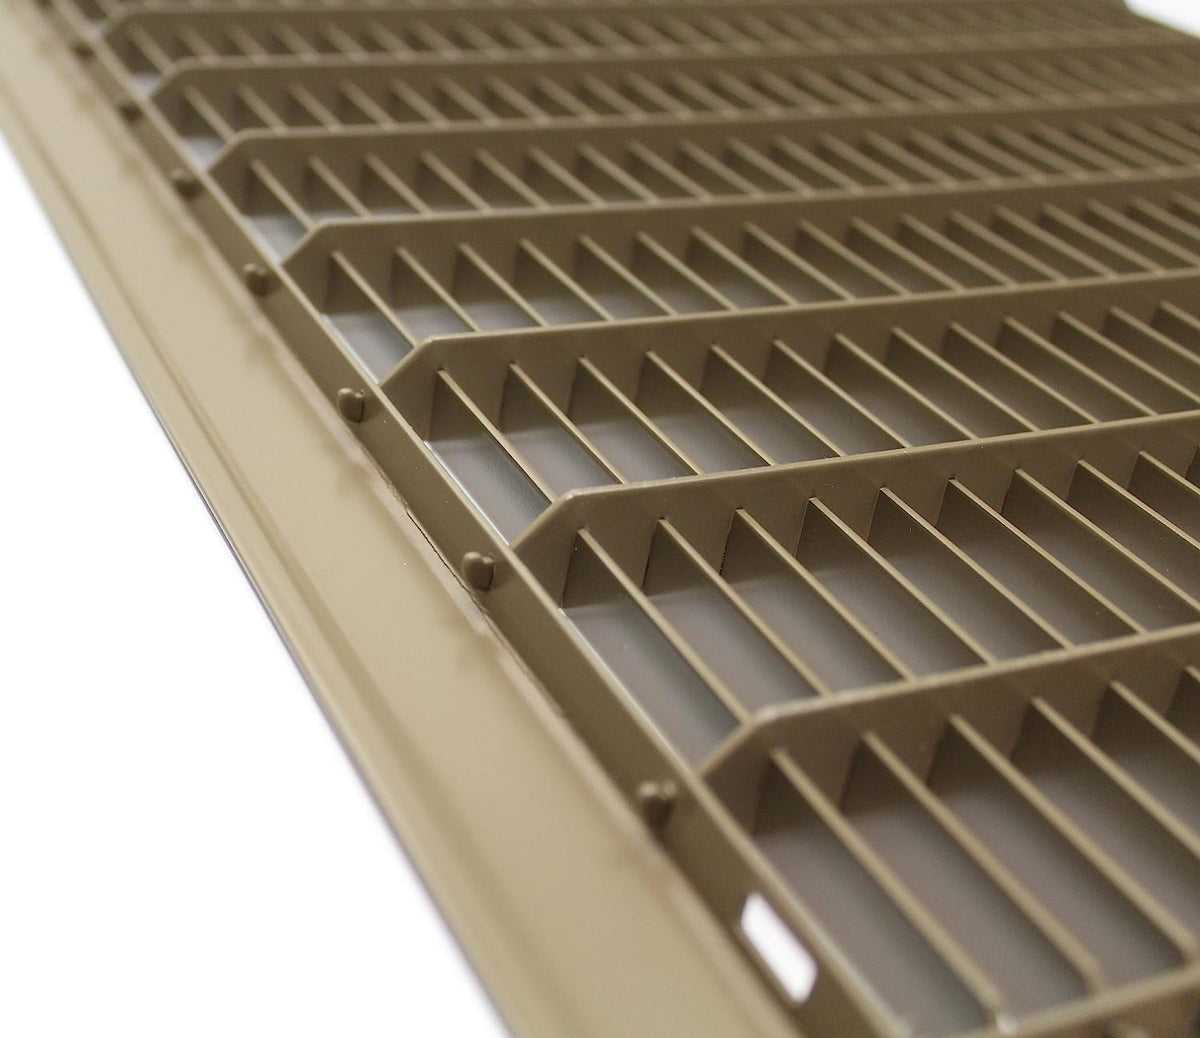 16&quot; X 20&quot; or 20&quot; X 16&quot; Heavy Duty Floor Grille - Fixed Blades Air Grille - Brown [Outer Dimensions: 17.75 X 21.75]